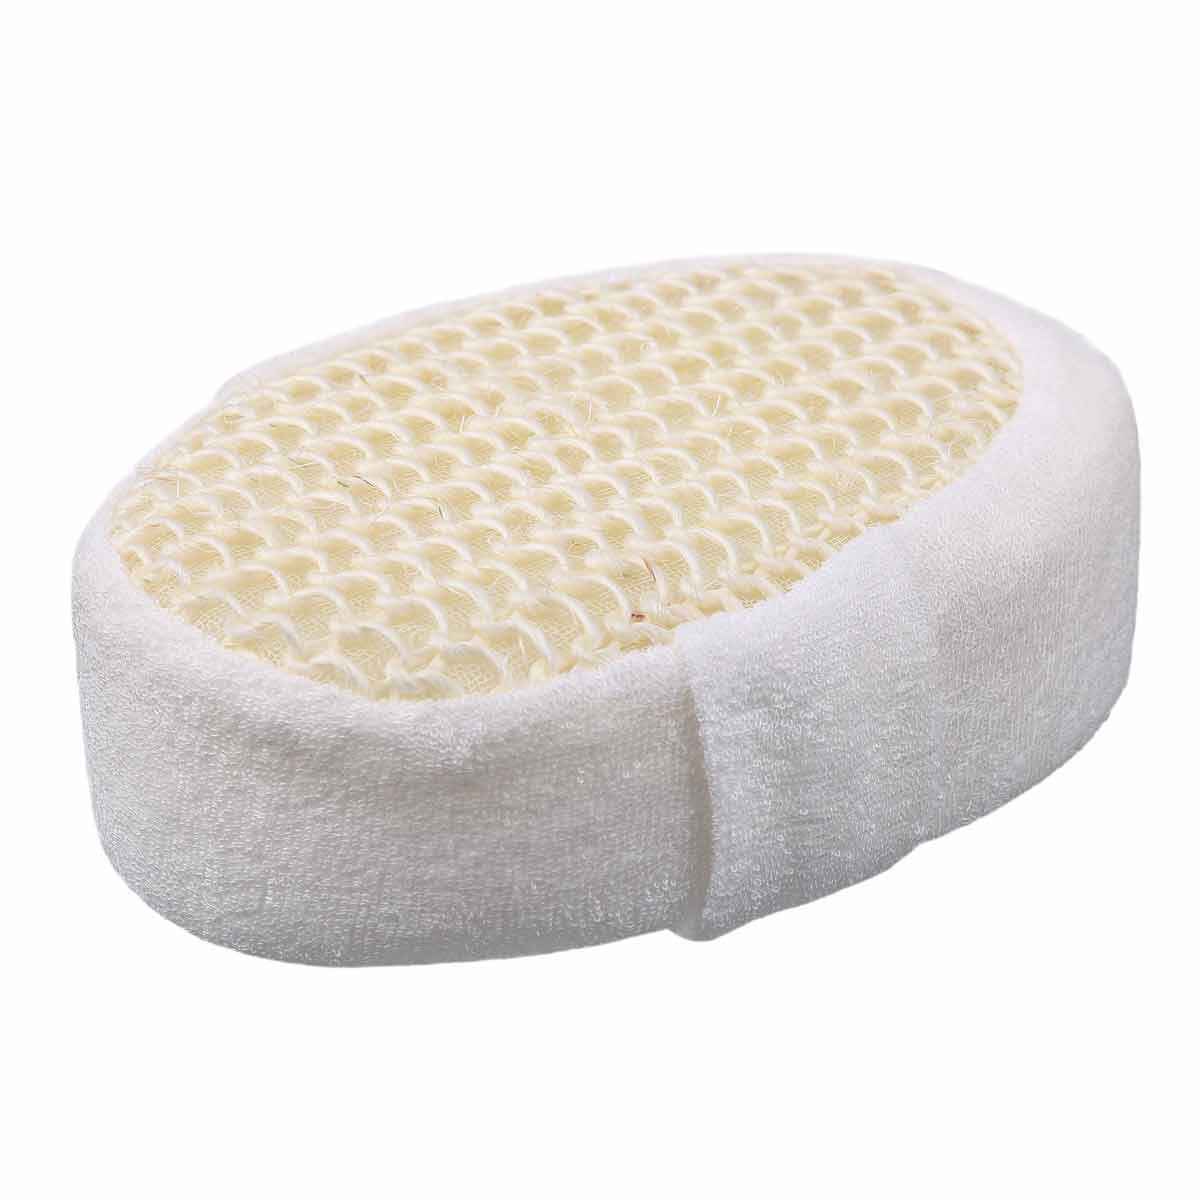 2-in-1 Luxe Sisal, Soft Bamboo Scrub & Sponge with Strap